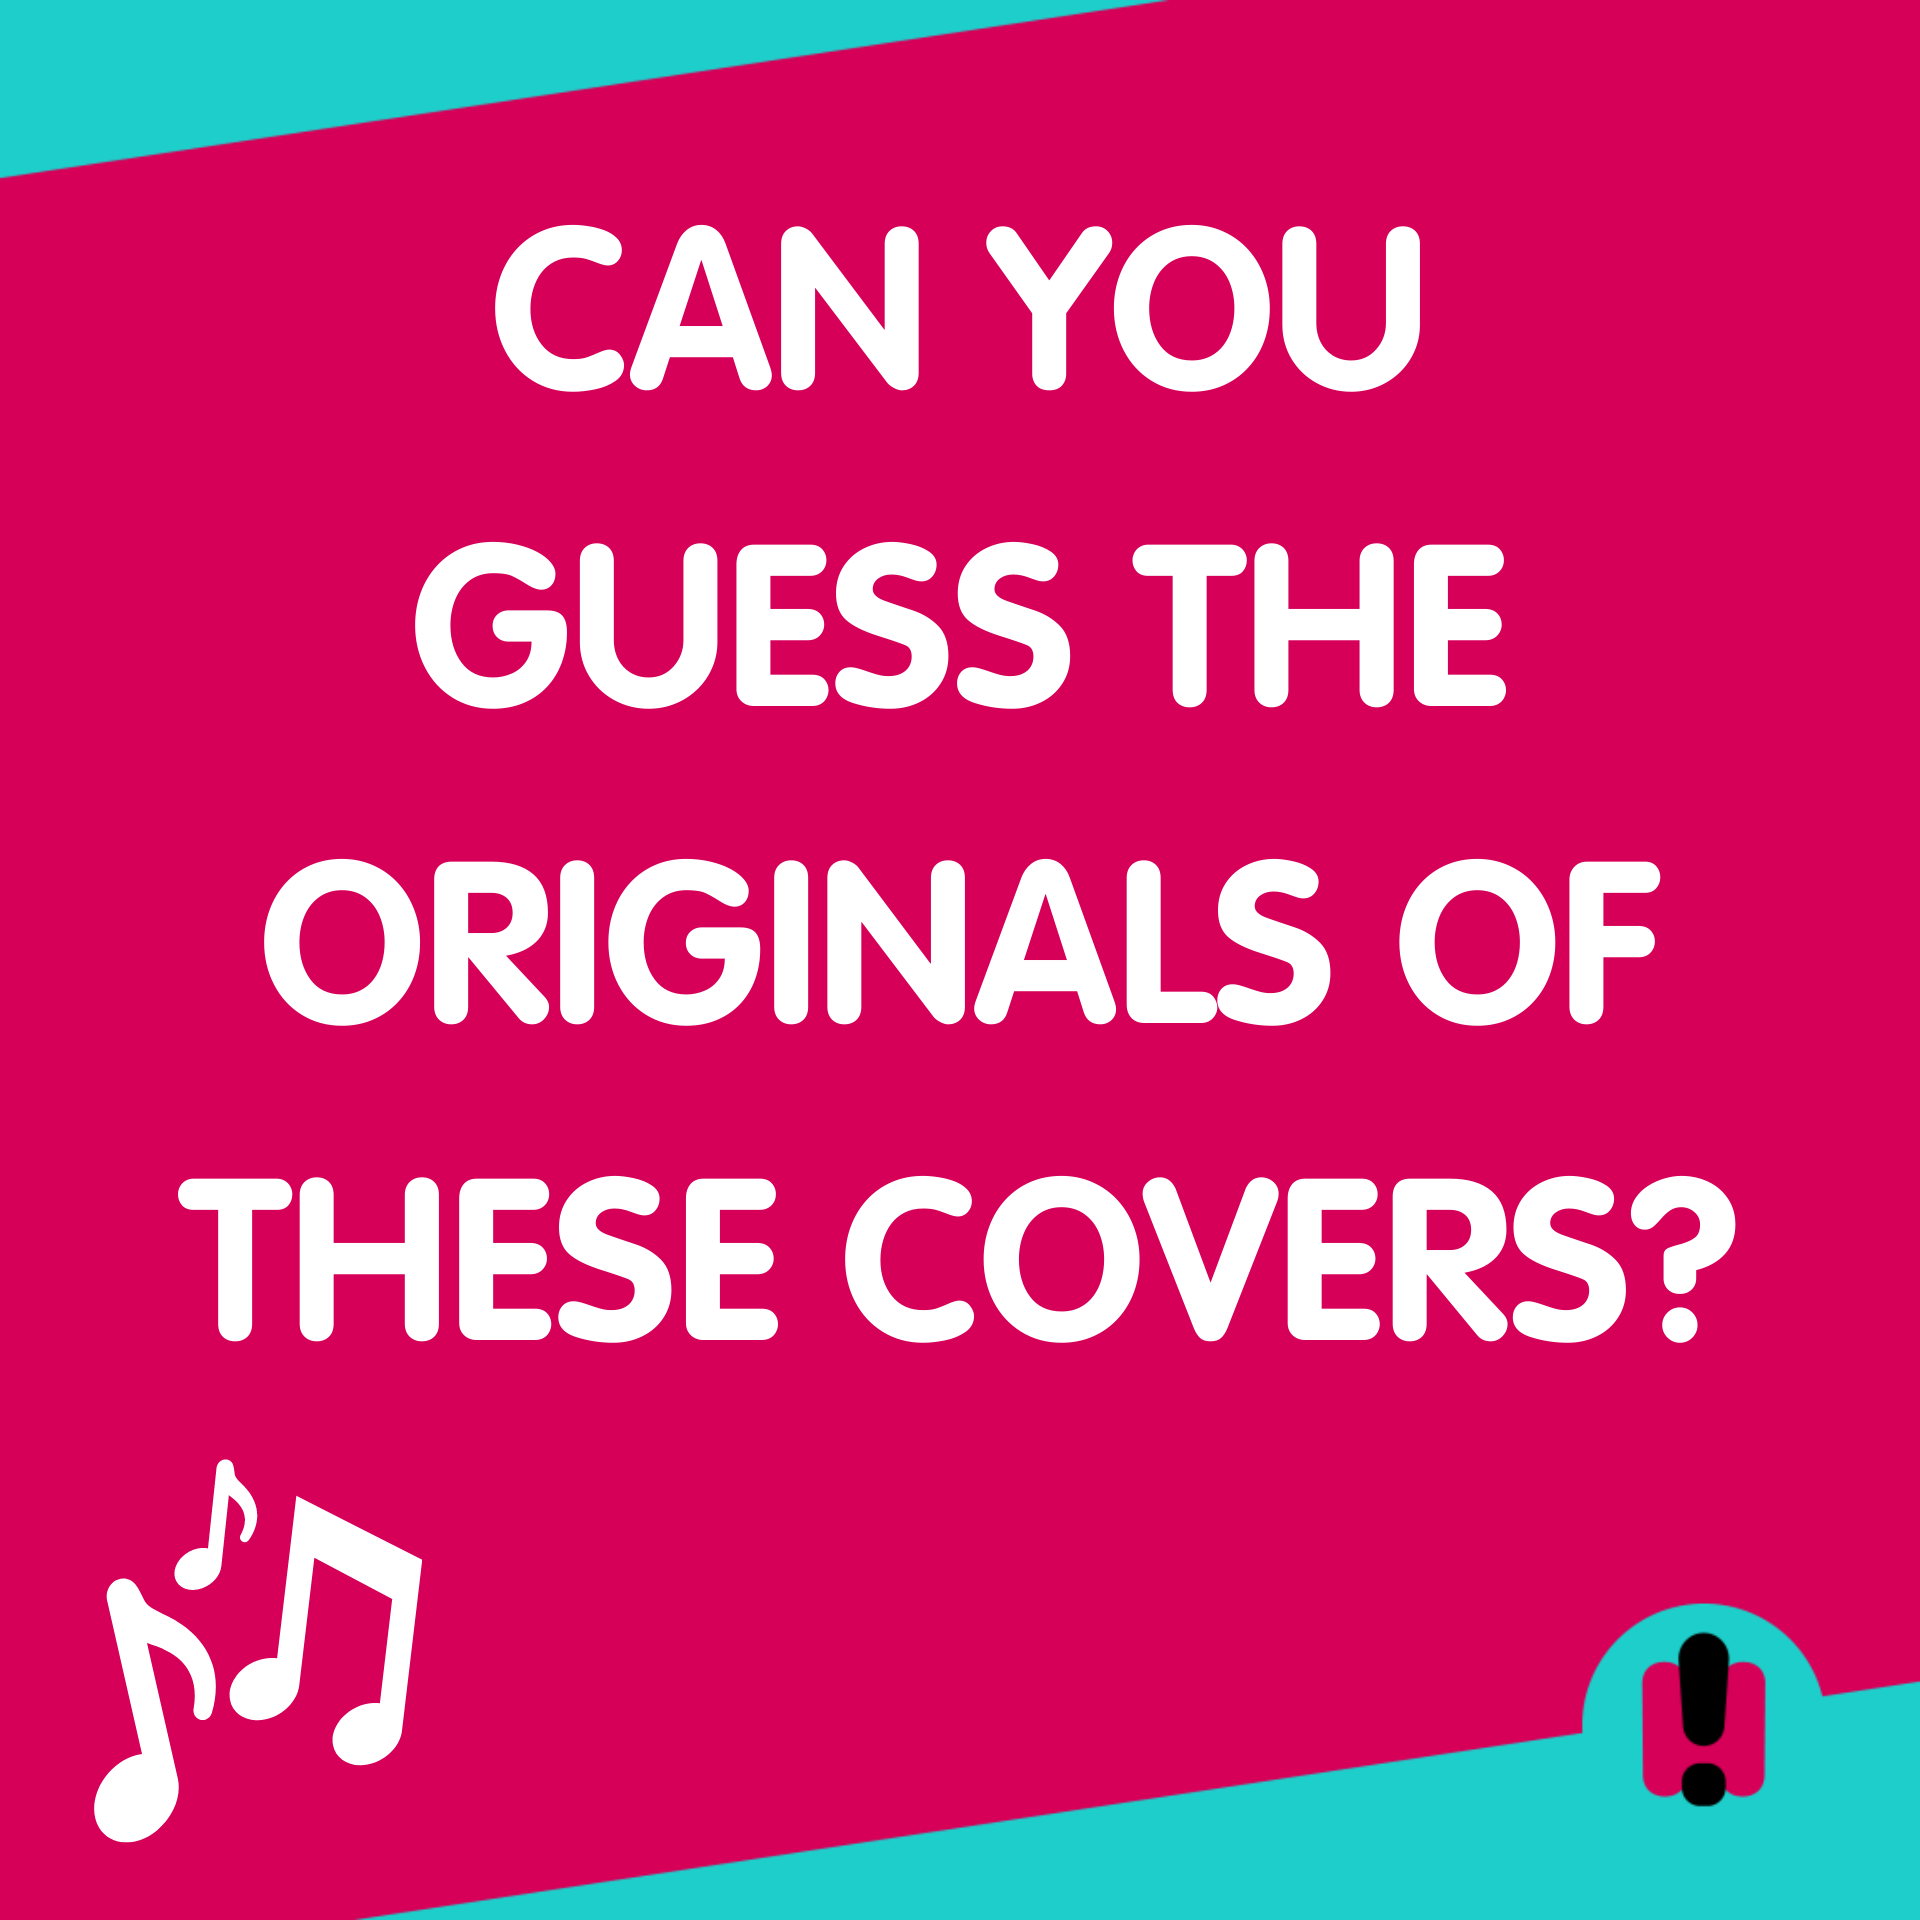 Keeshia found some, ahhh, not great covers of songs that we play. Can you guess them?